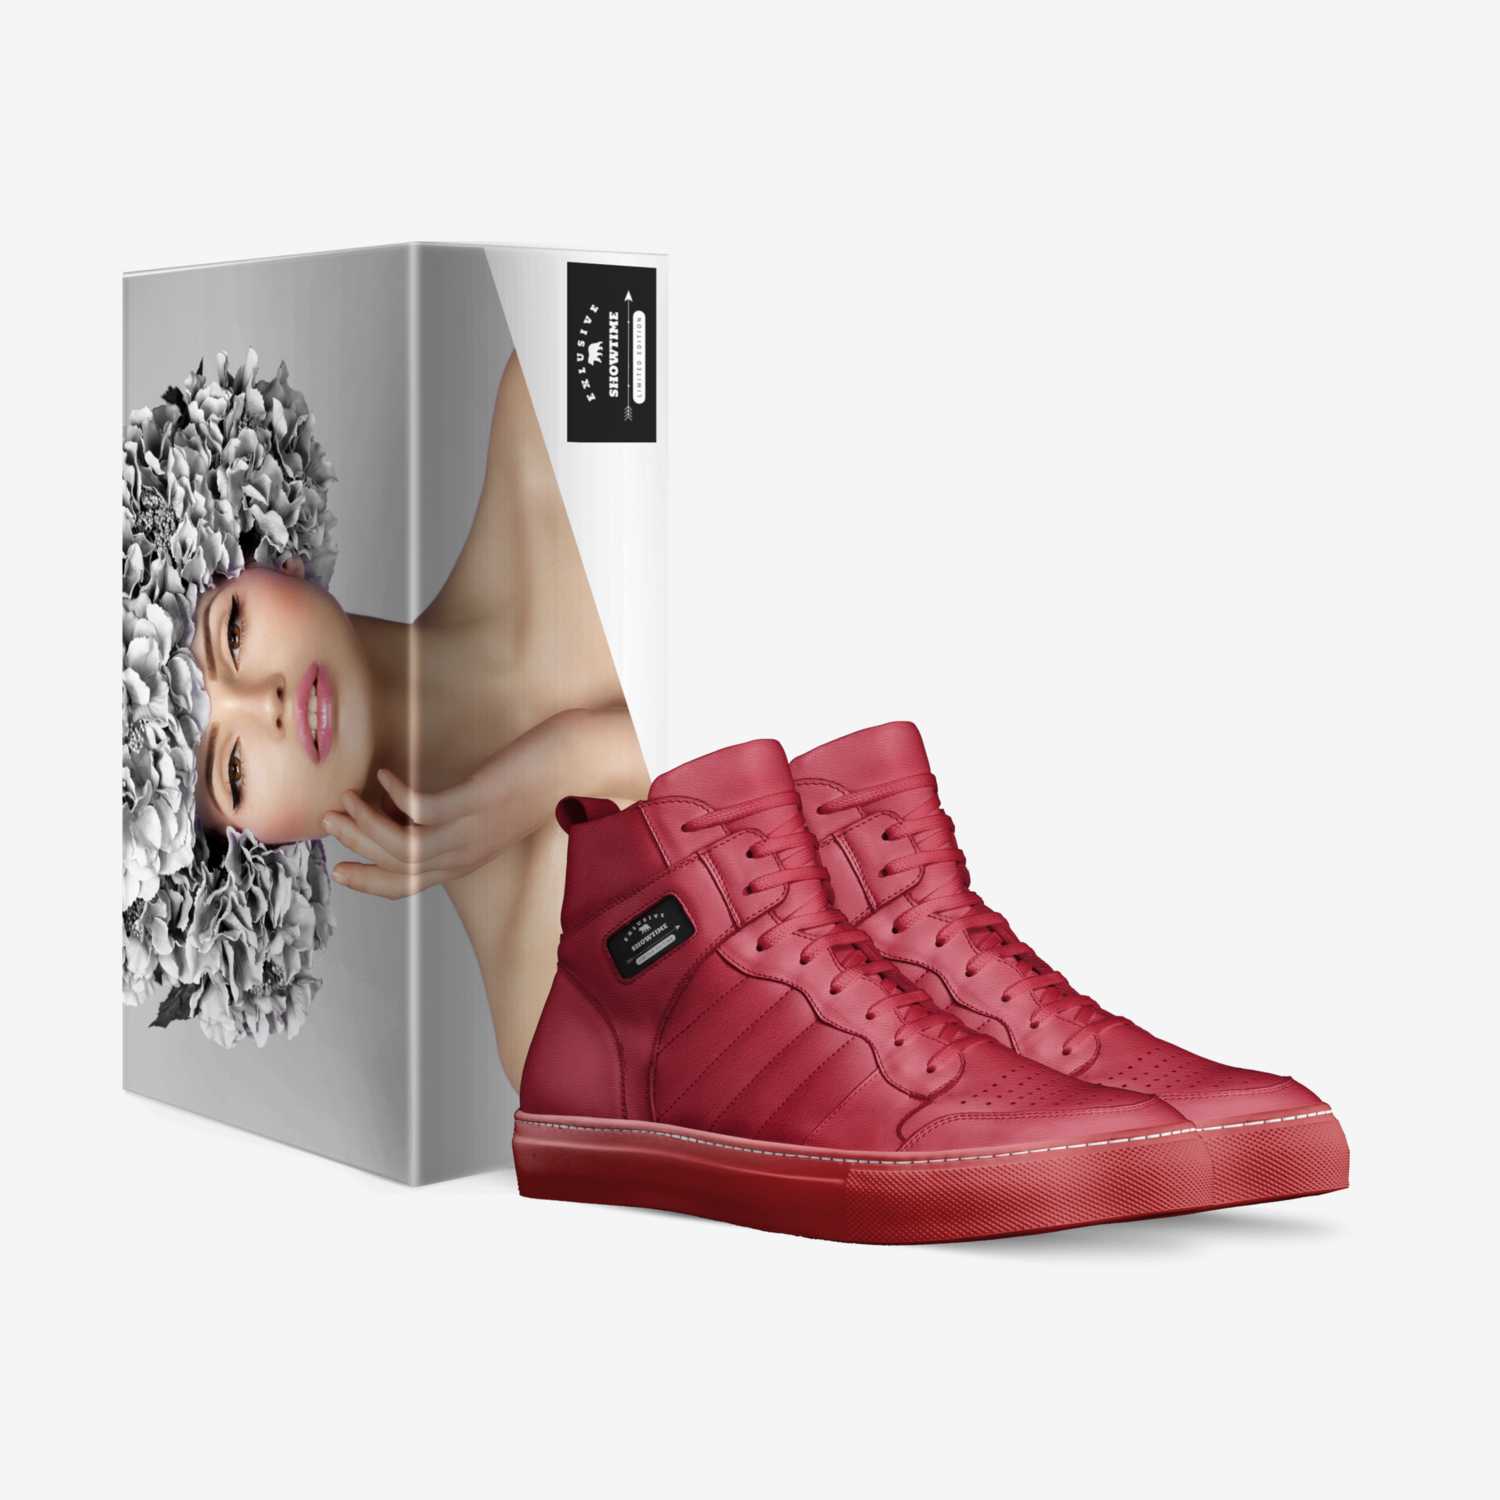 Showtime custom made in Italy shoes by Xxxx | Box view